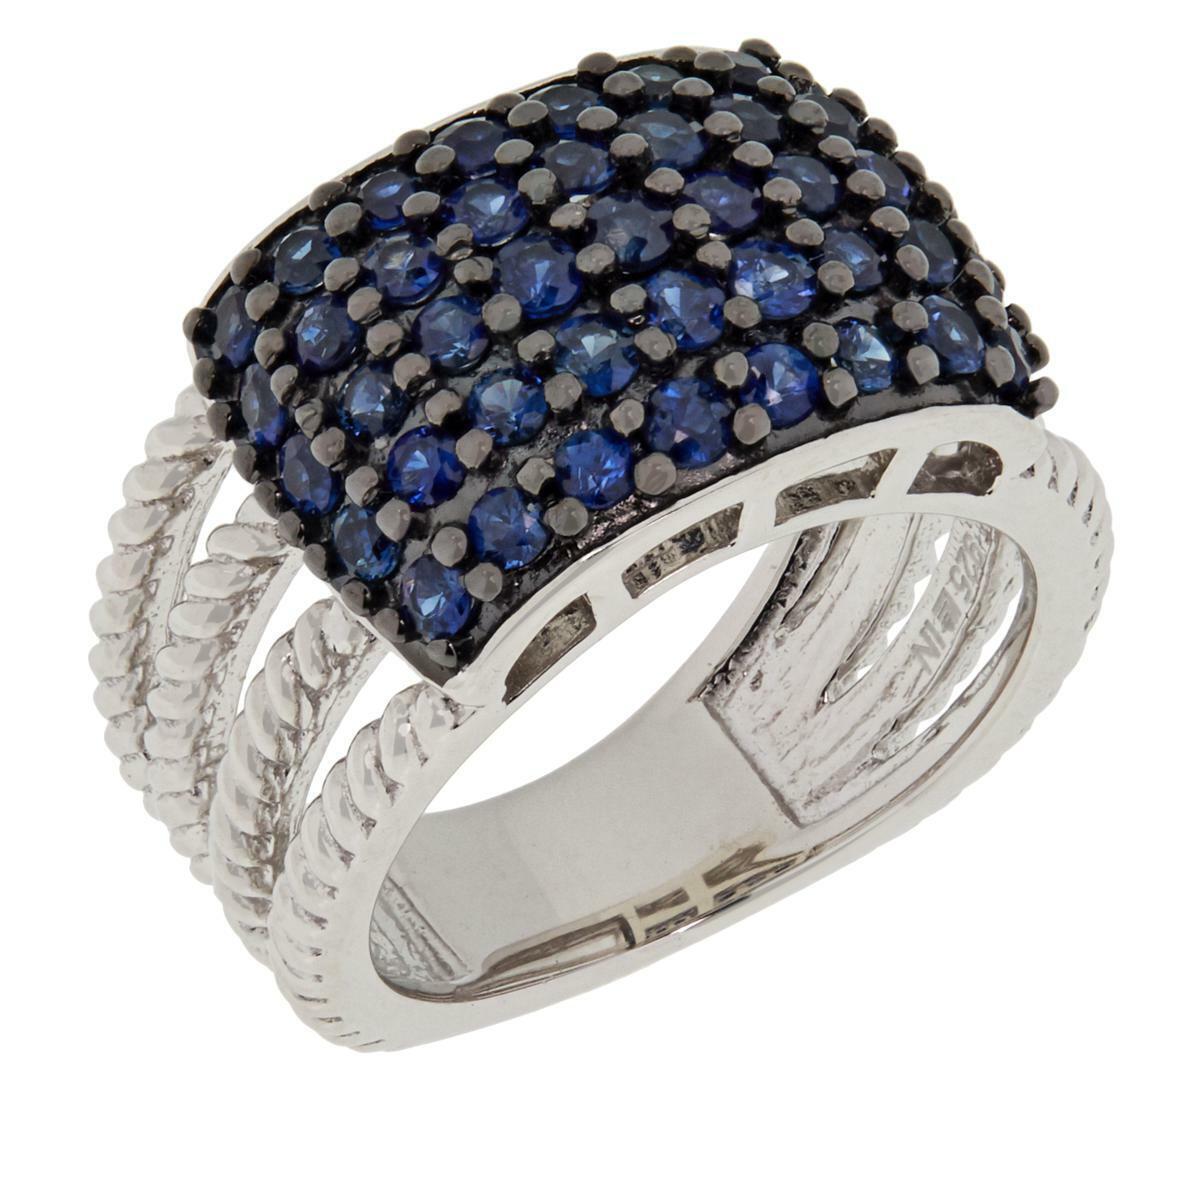 Colleen Lopez Sterling Silver Blue Sapphire Multi-Row Ring, Size 6